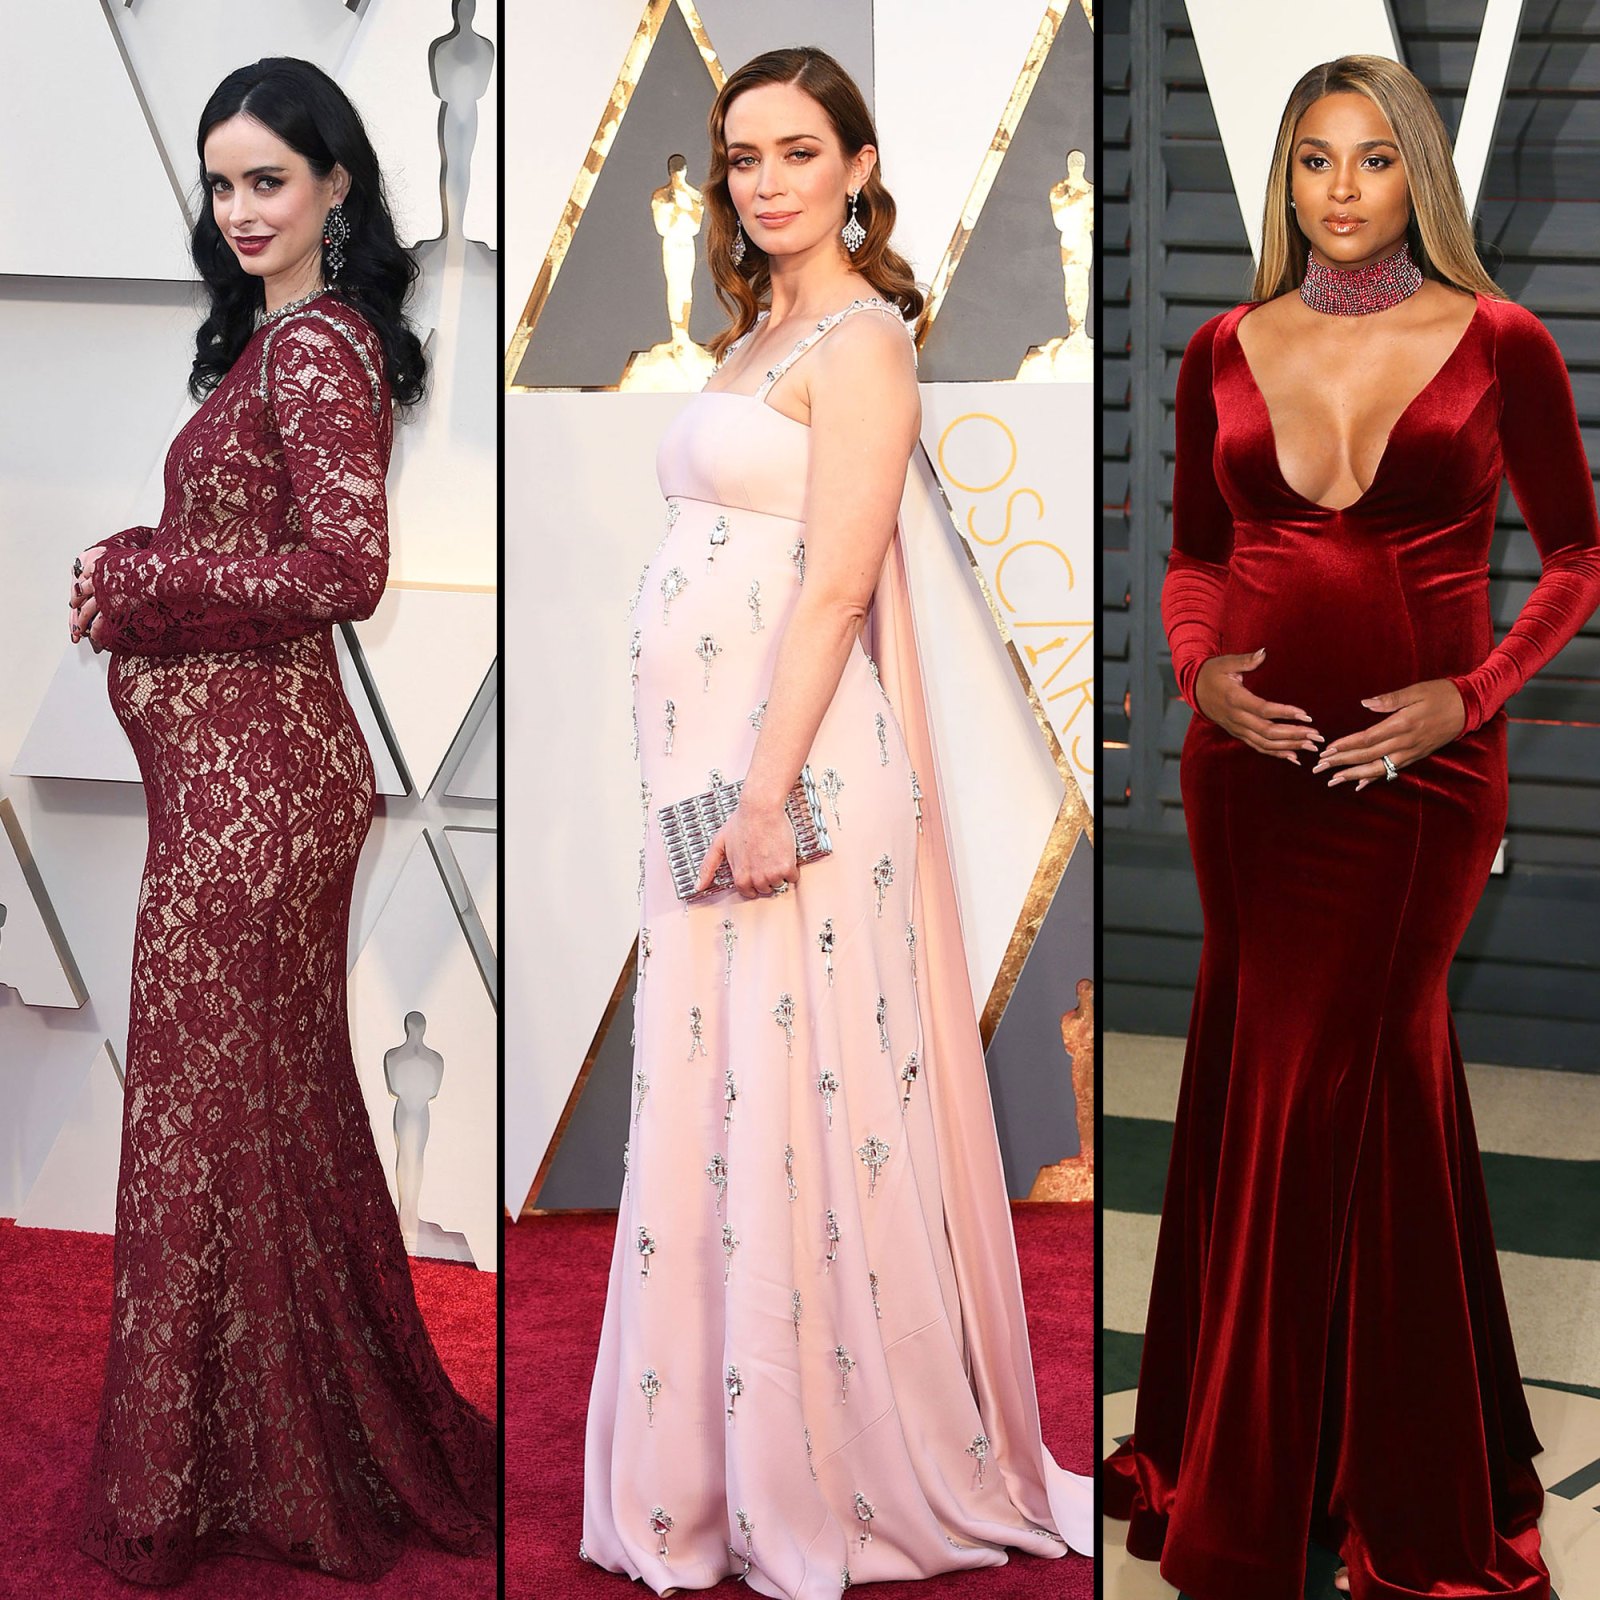 Pregnant Celebrities Show Off Baby Bumps on the Oscars Red Carpet